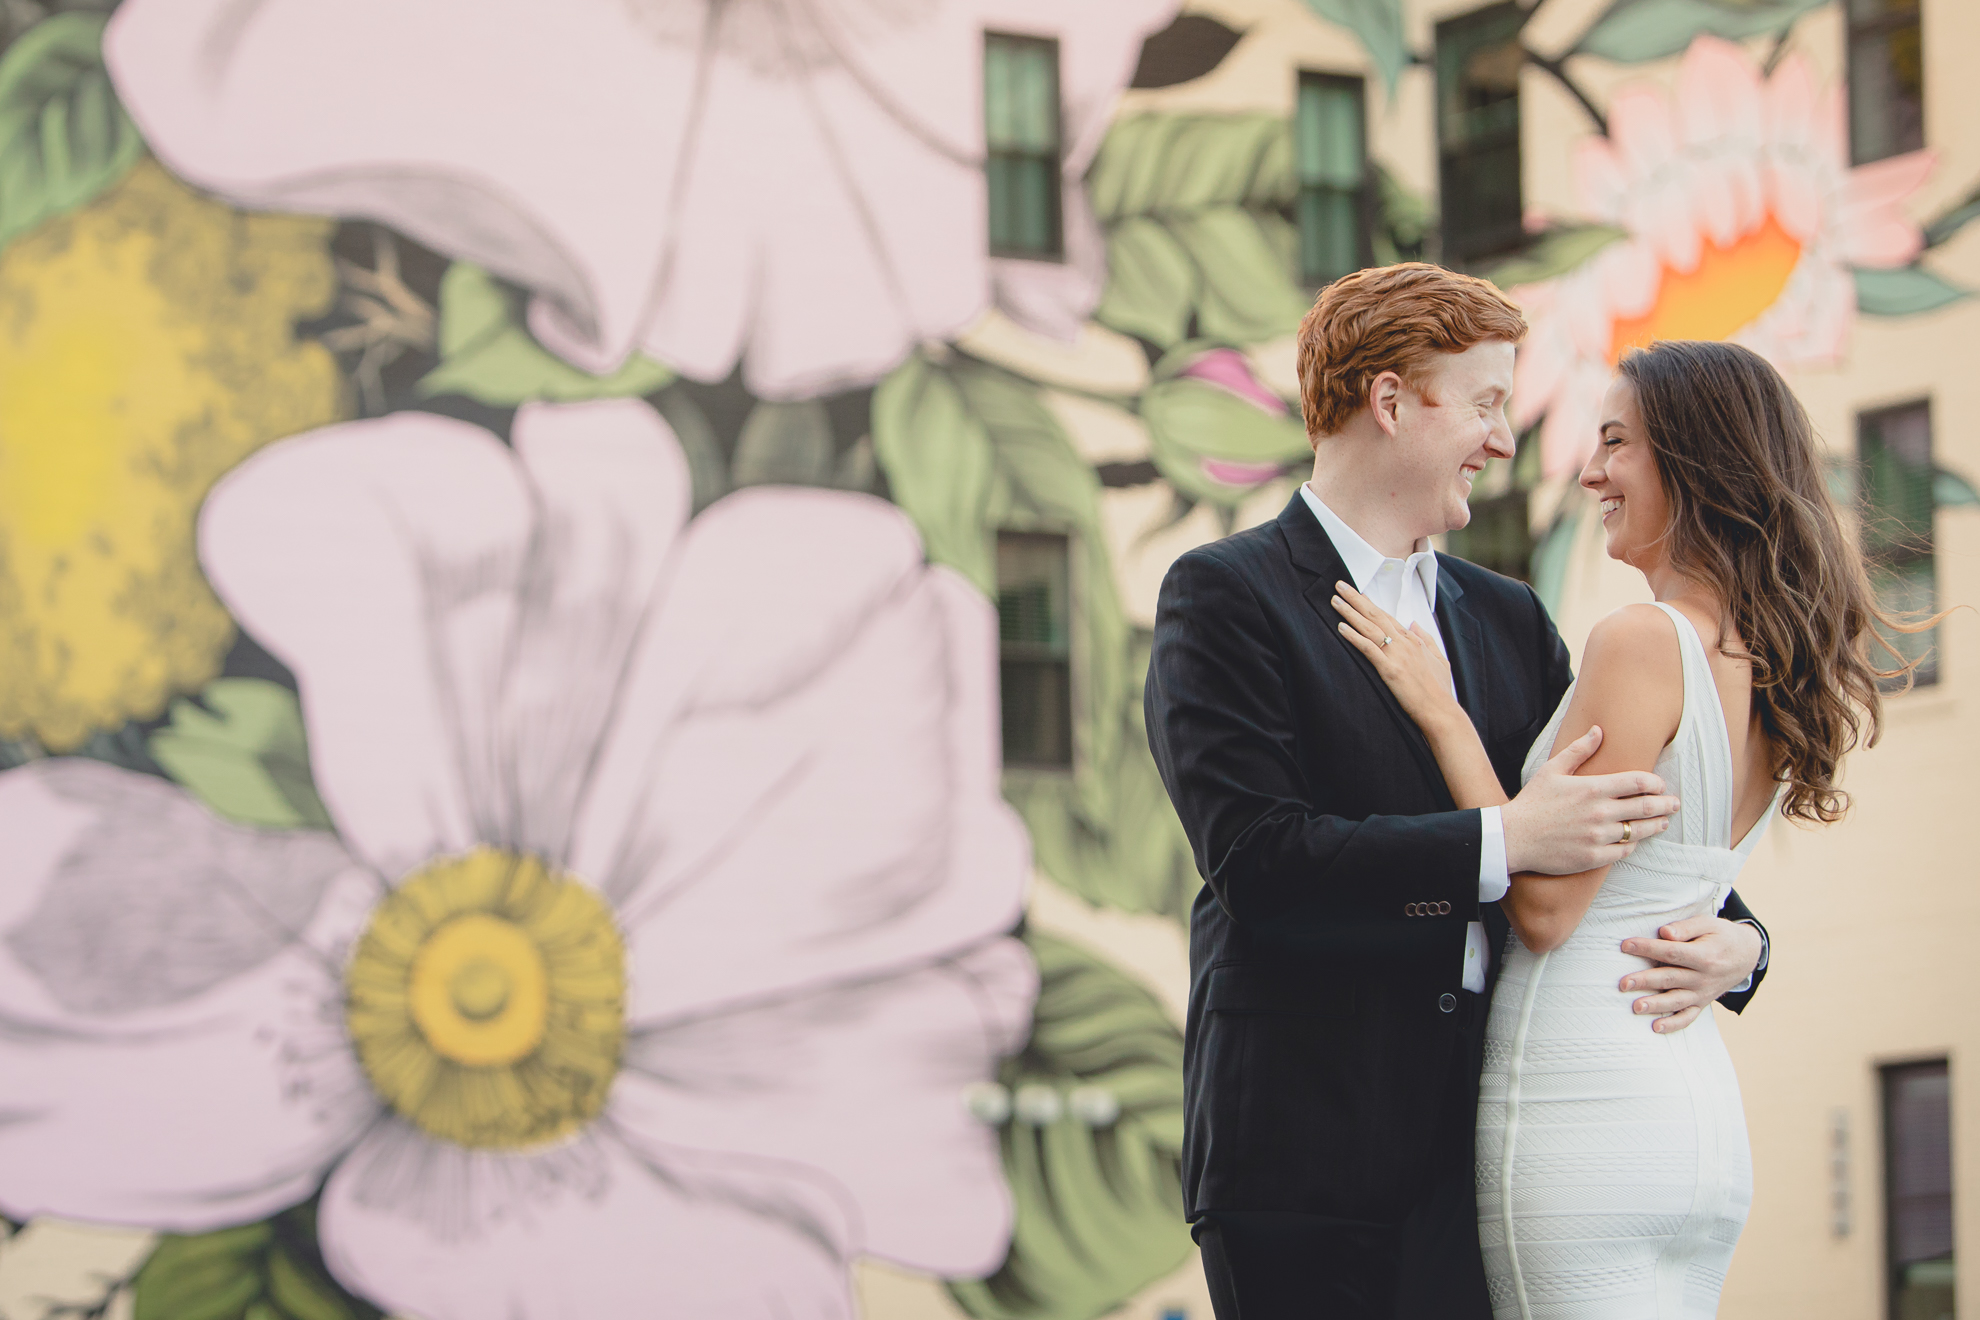 Courtney Woods and John Stevens wedding engagement portrait photography at Wildflowers for Buffalo mural in Buffalo, NY